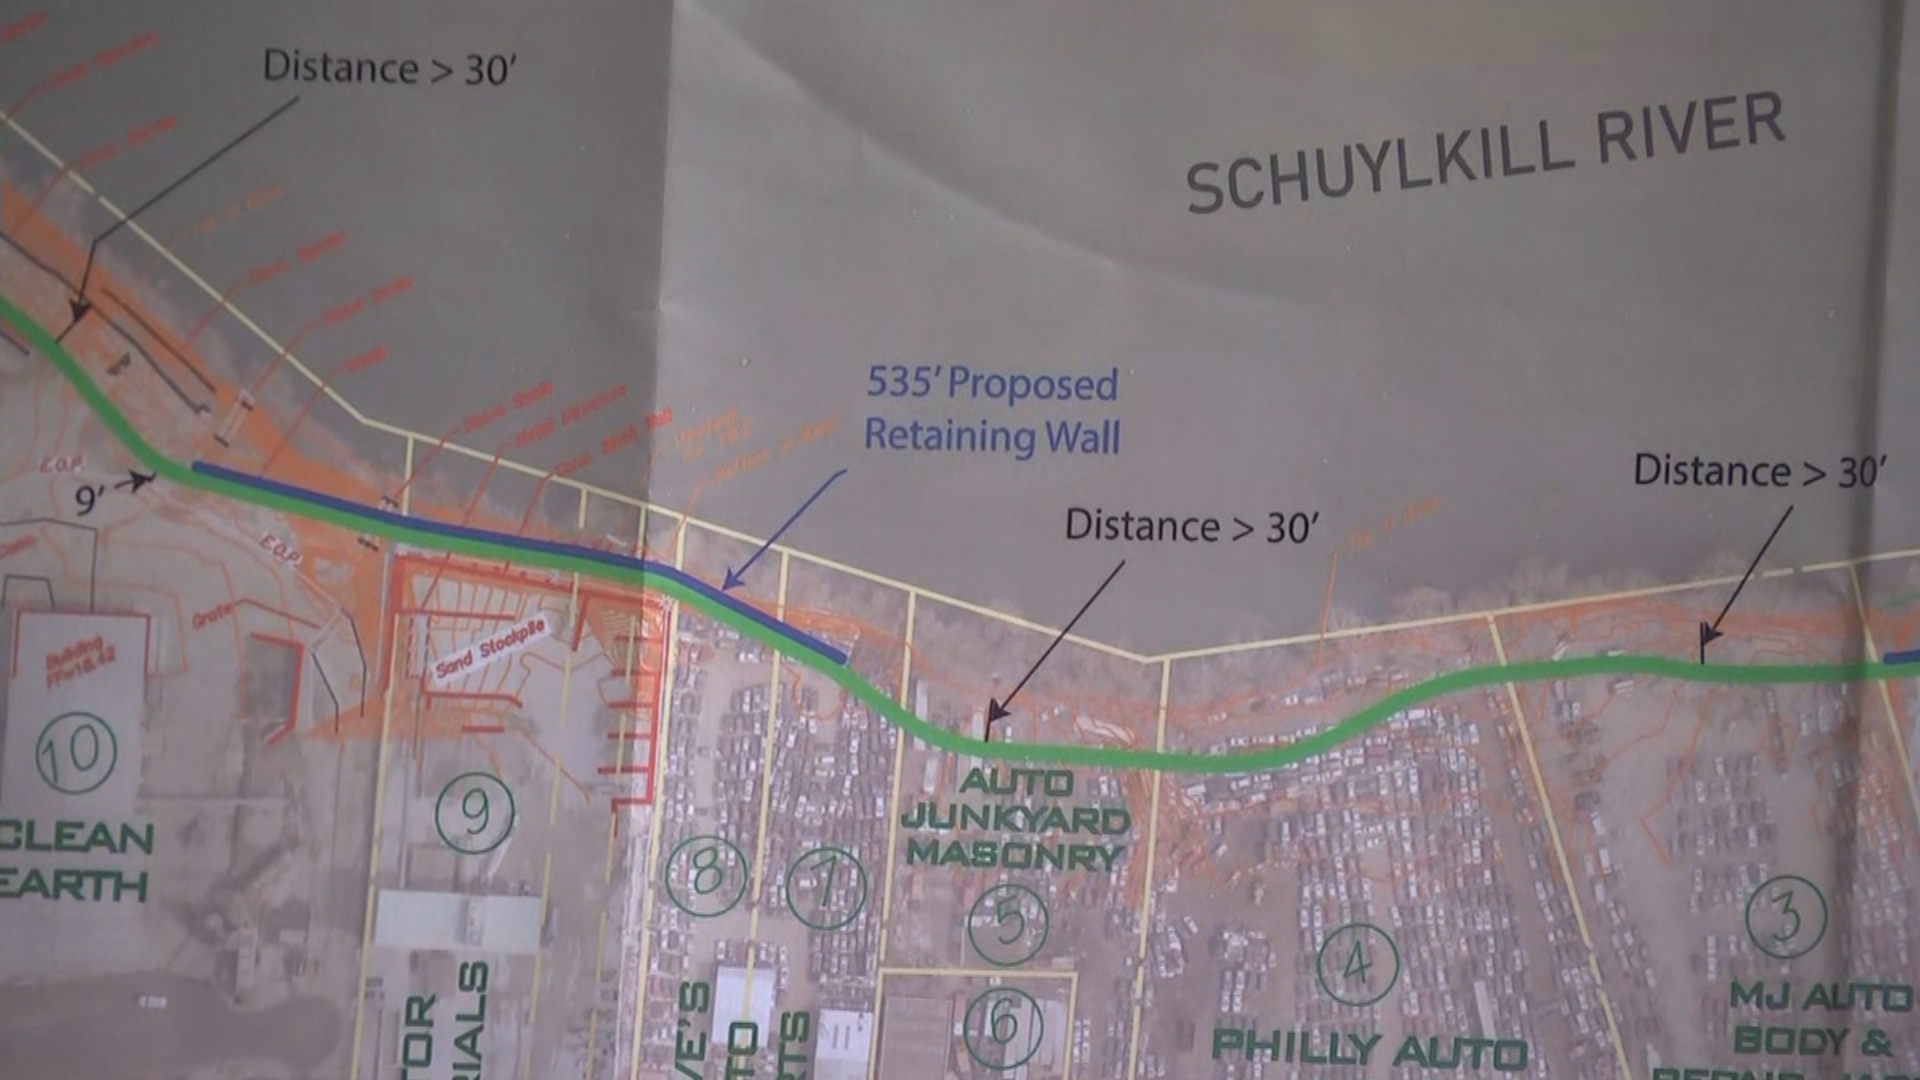 Schuylkill River Trail Getting $ 2.5 Million Expansion From Center City To Southwest Philadelphia – CBS Philly